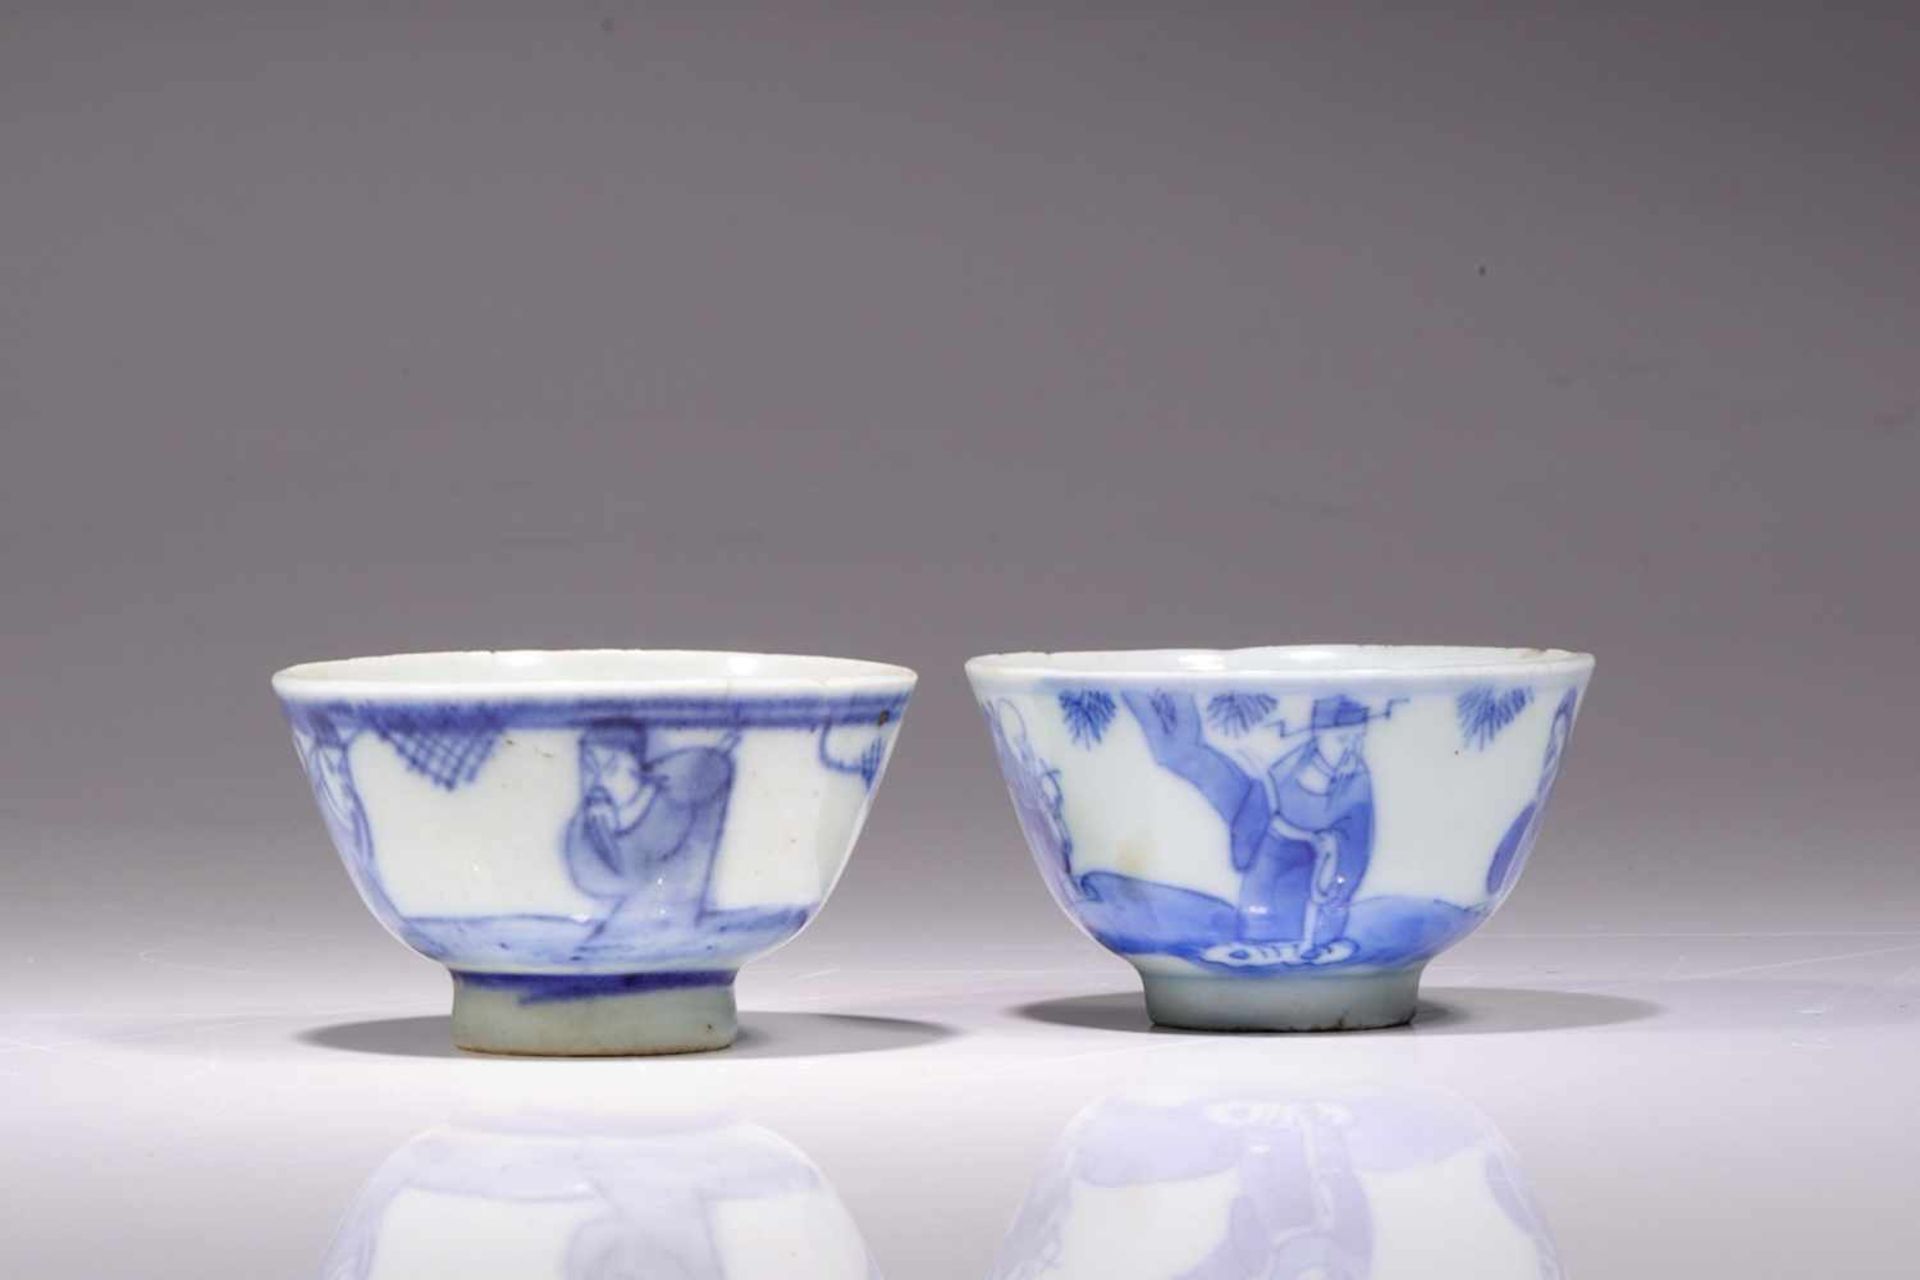 TWO TEA CUPSporcelain,China, 16th century,Size: 4 cmBlue white porcelain tea cups with paintings